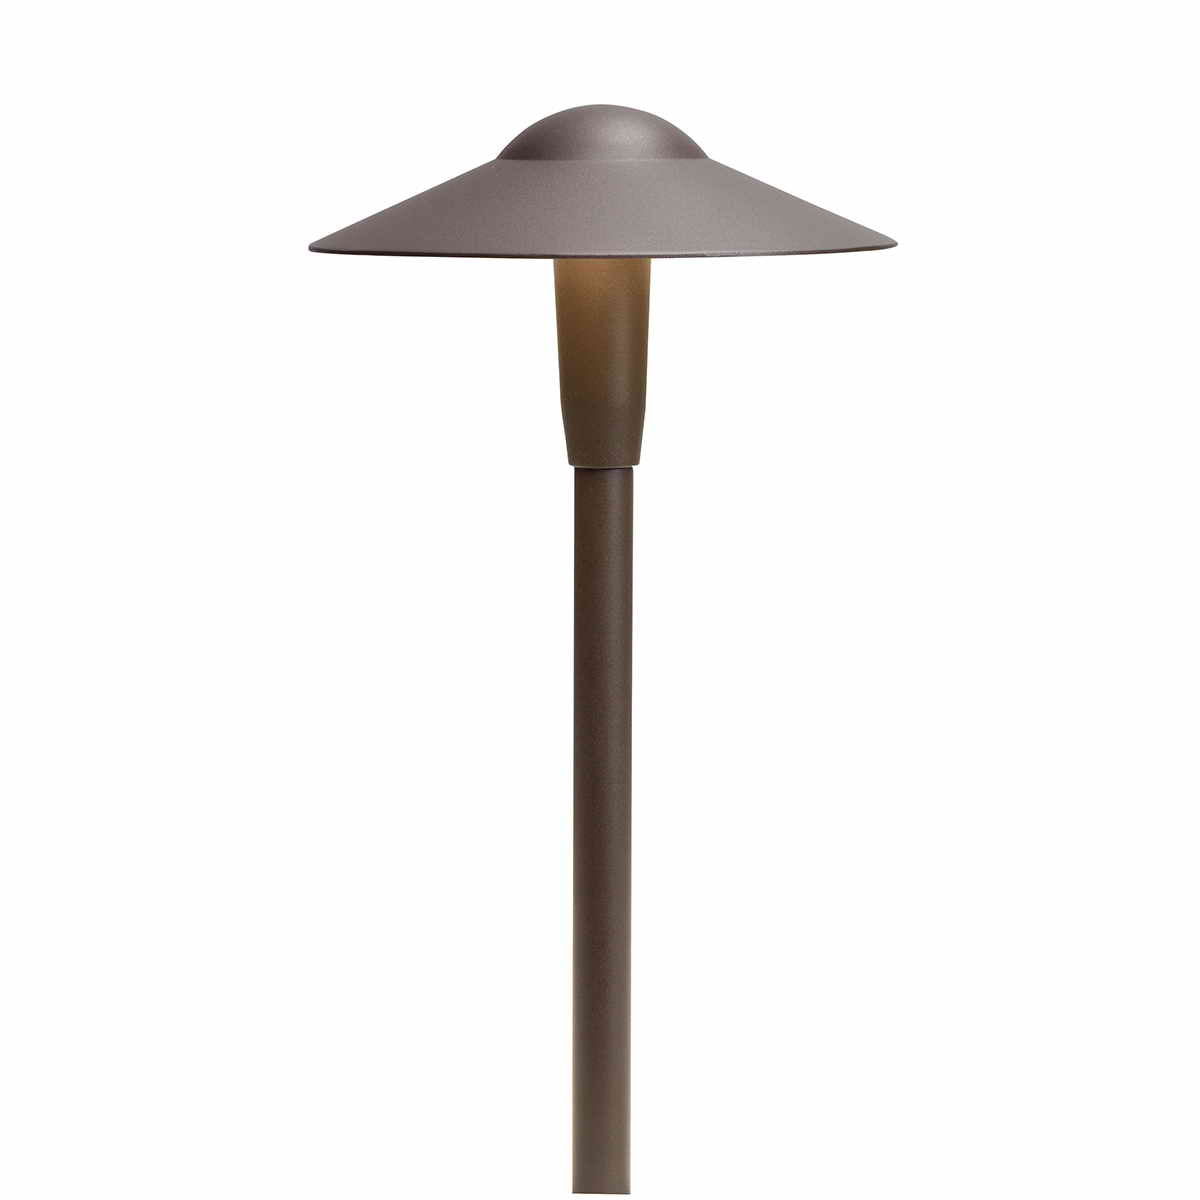 3W 250 Lumens LED Short Dome Path Light Textured Architectural Bronze